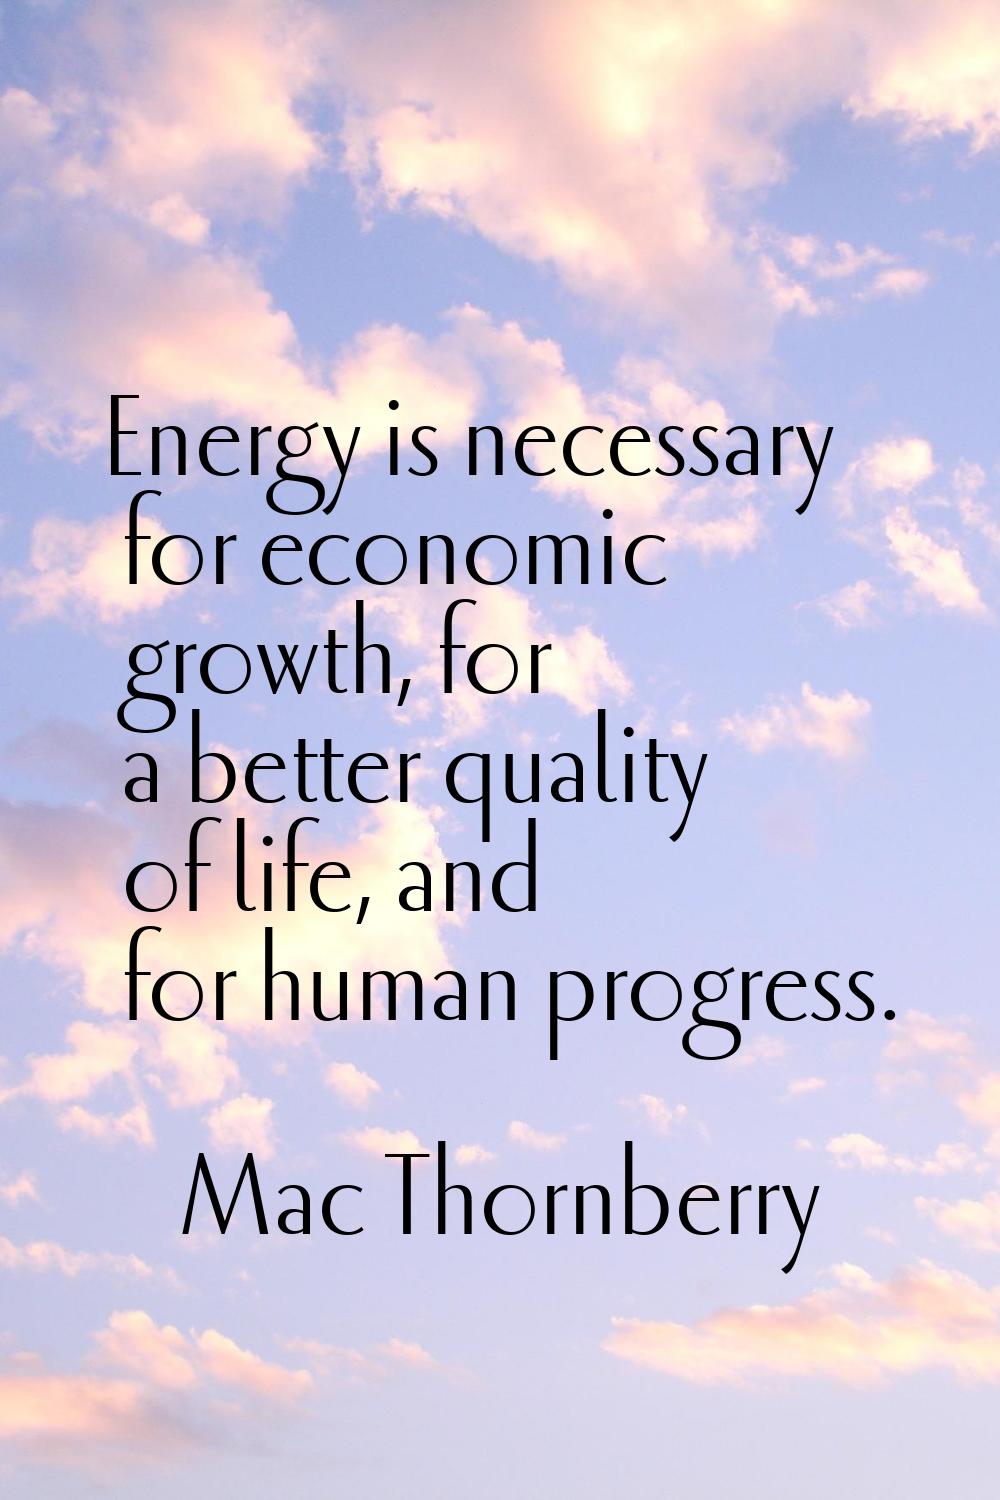 Energy is necessary for economic growth, for a better quality of life, and for human progress.